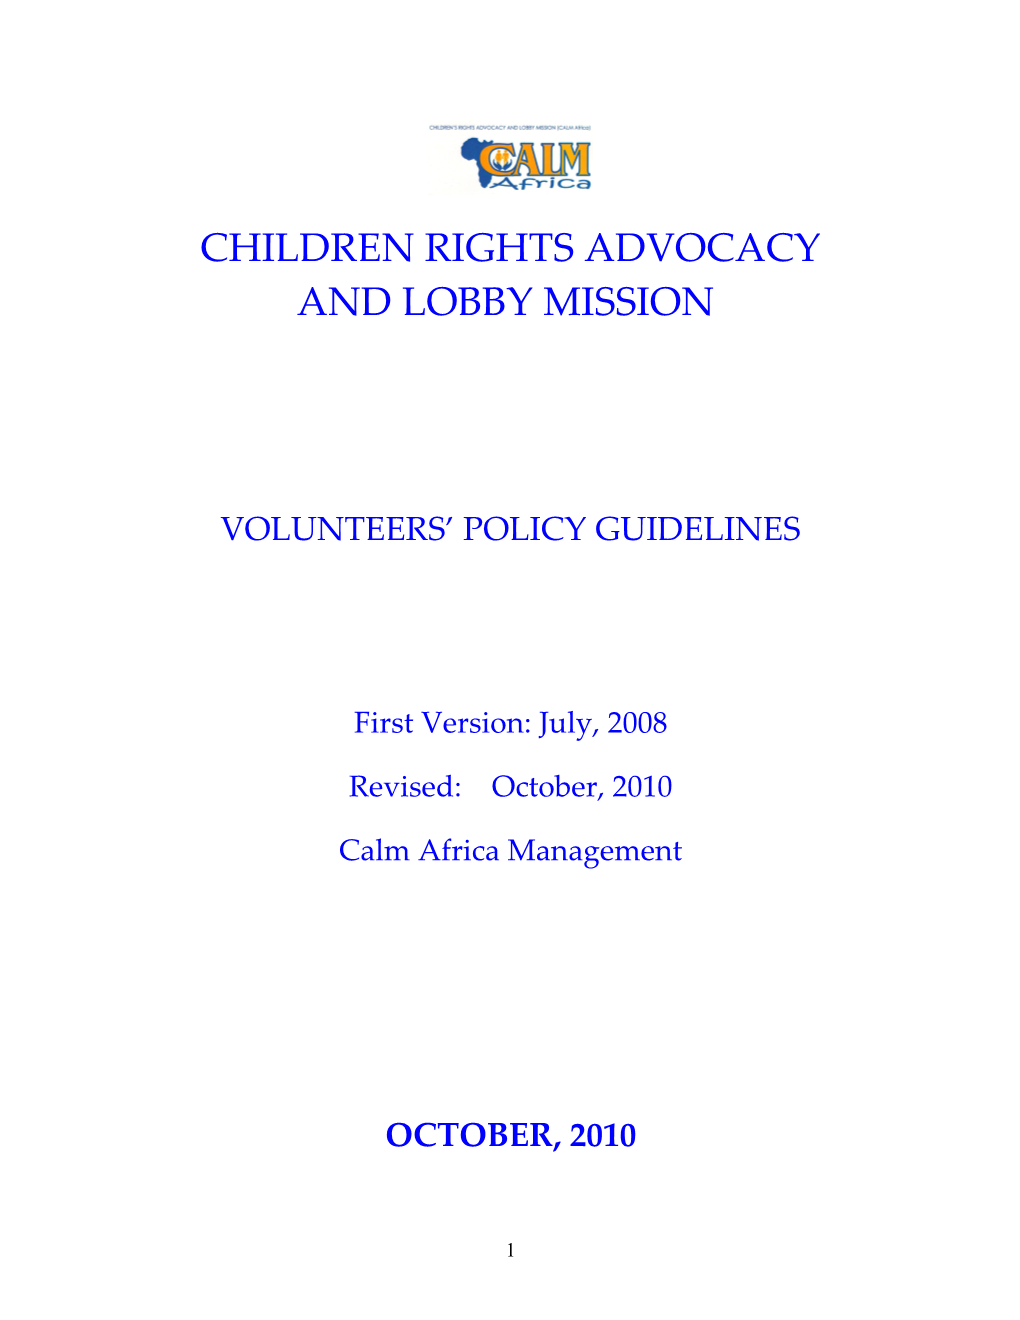 Calm Africa Volunteers Policy Guidelines